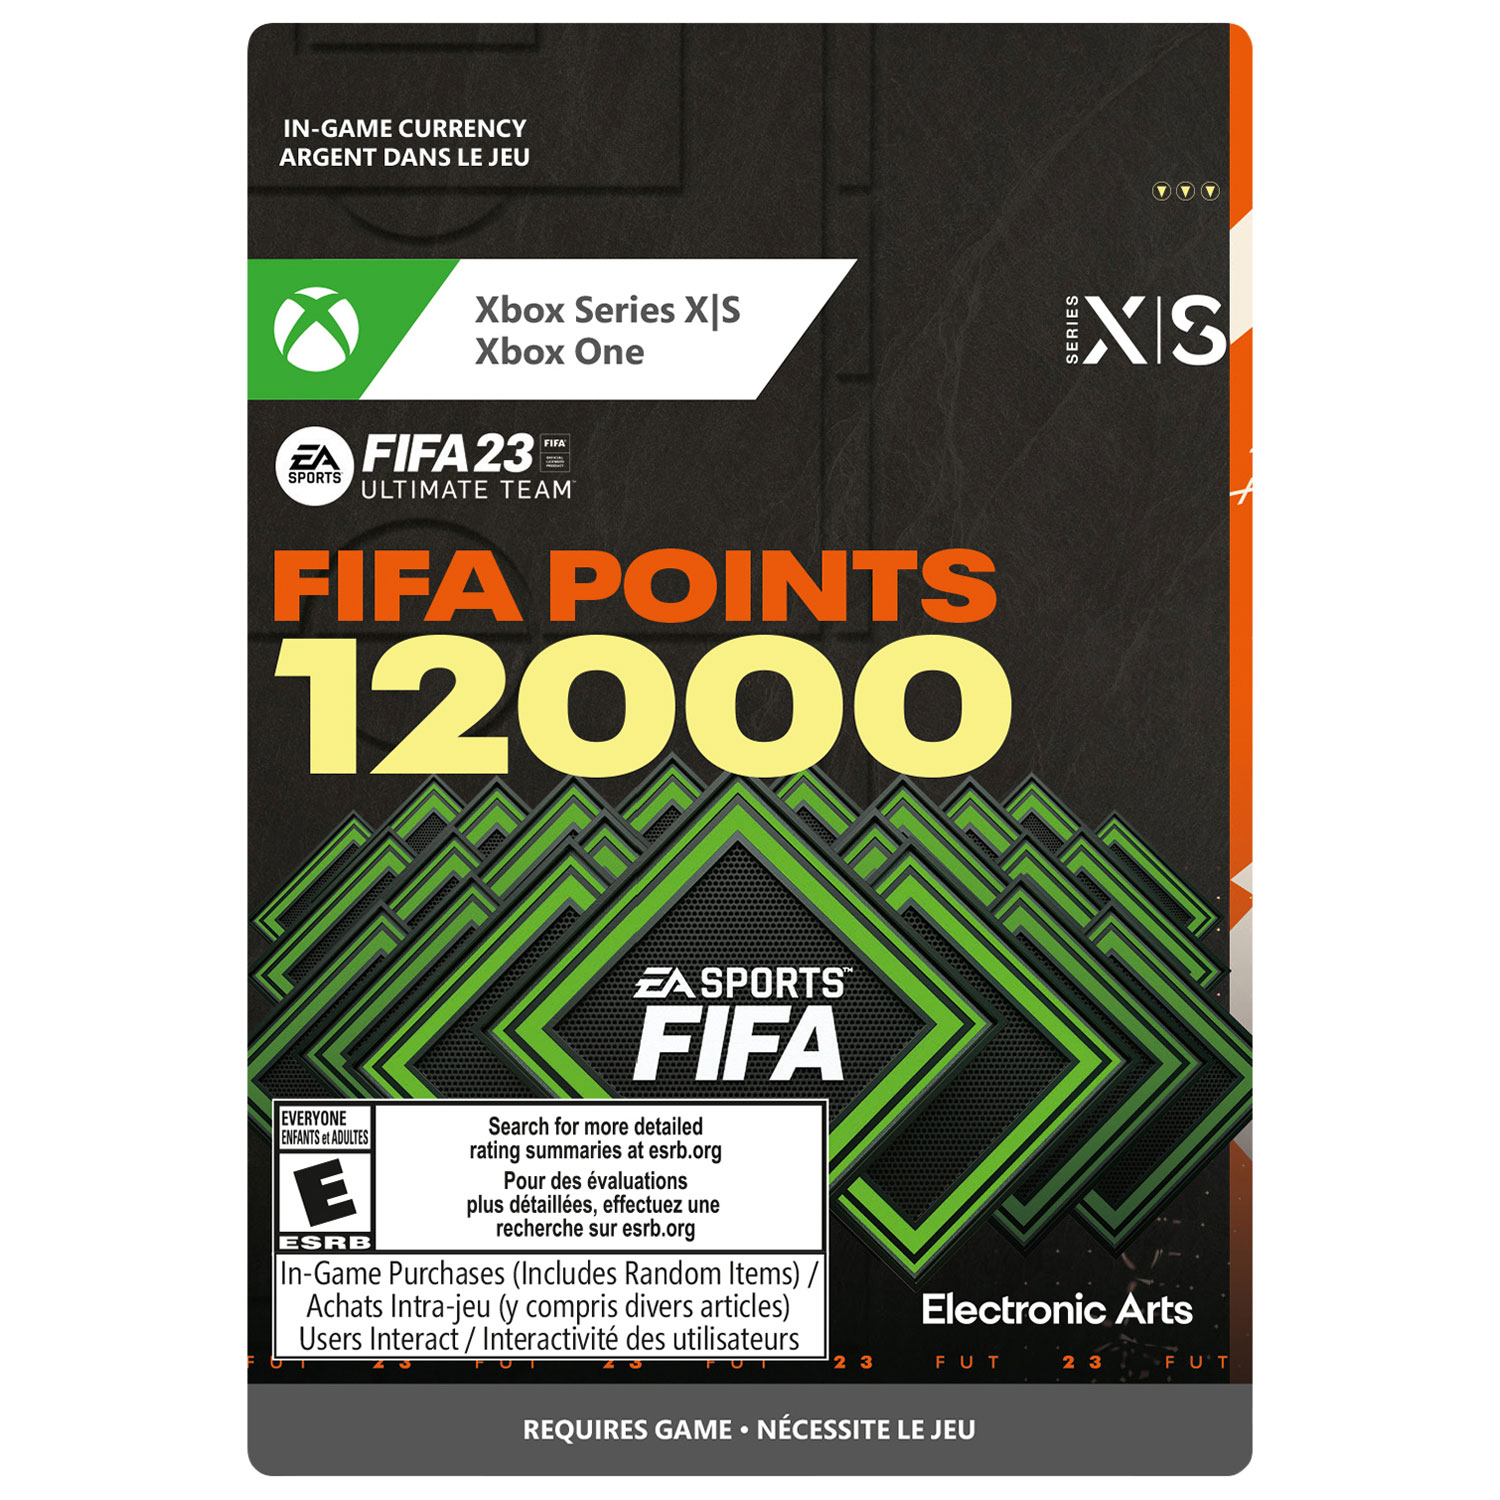 FIFA 23: 12,000 Points (Xbox Series X|S / Xbox One) - Digital Download